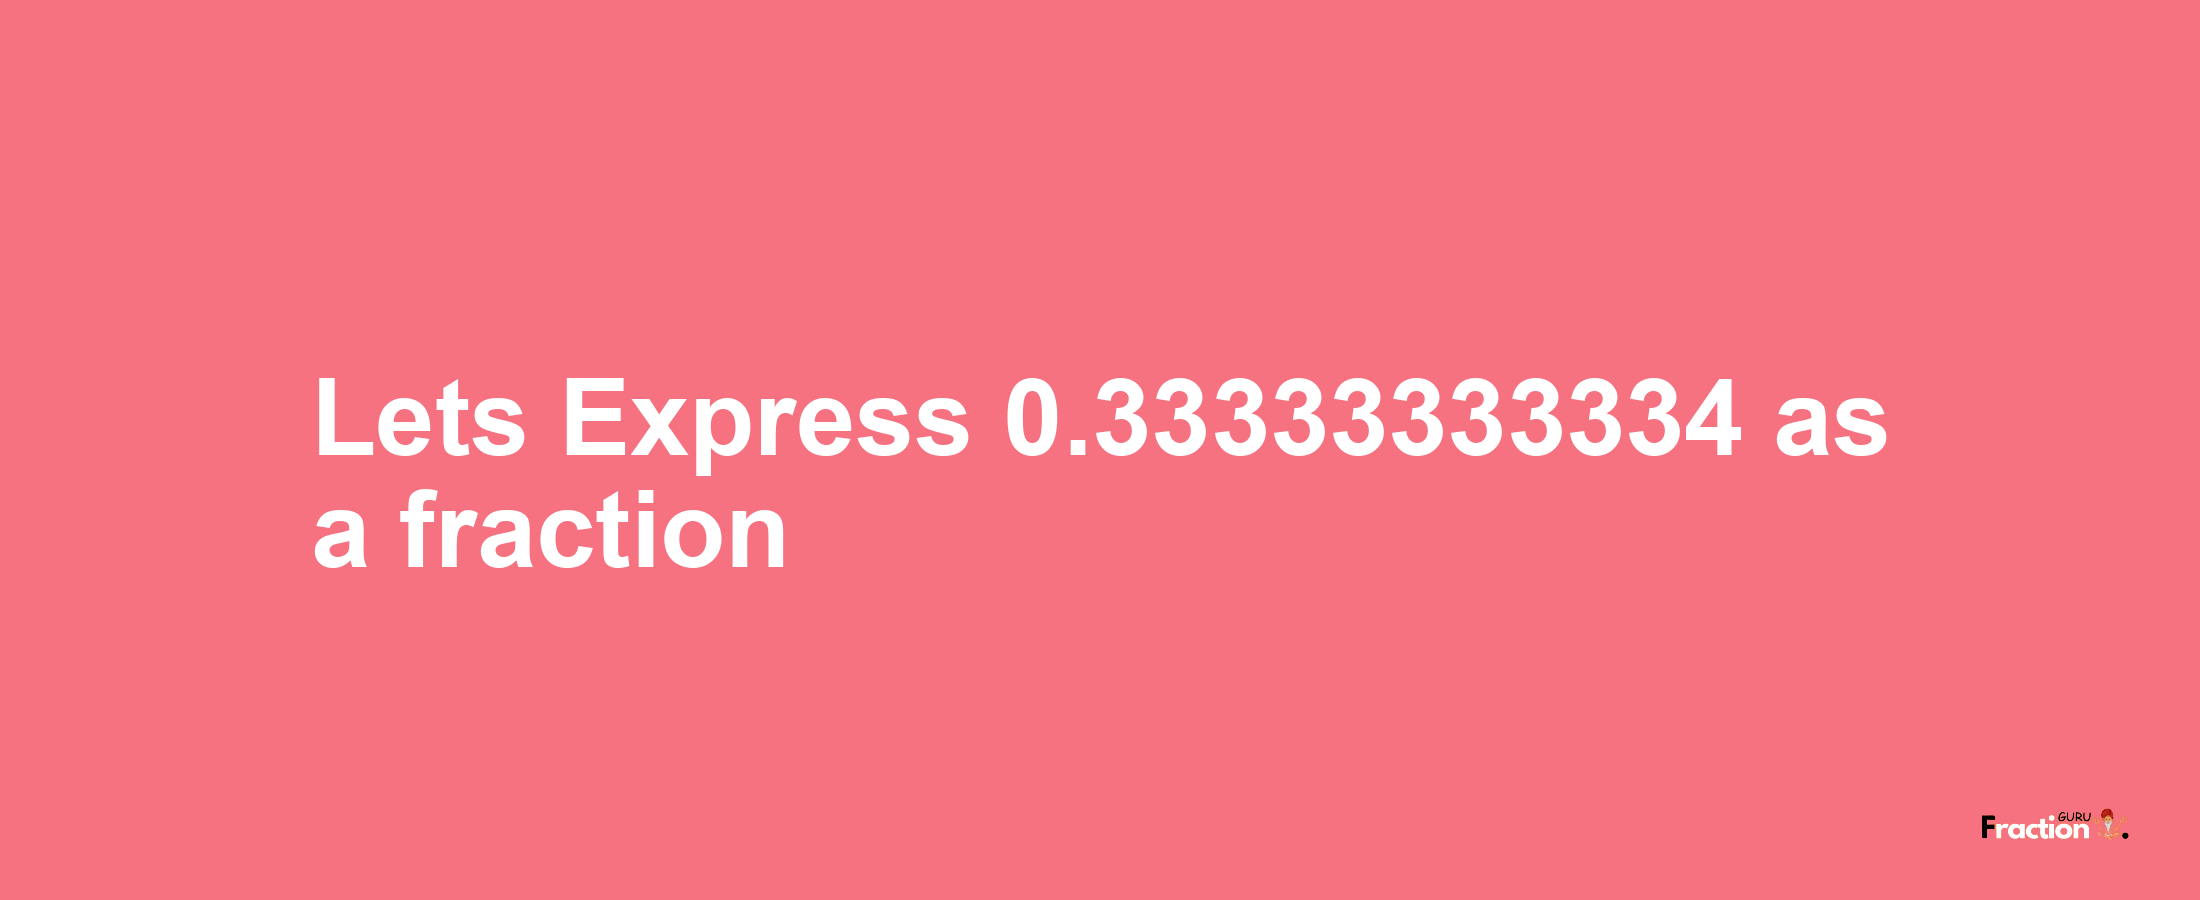 Lets Express 0.33333333334 as afraction